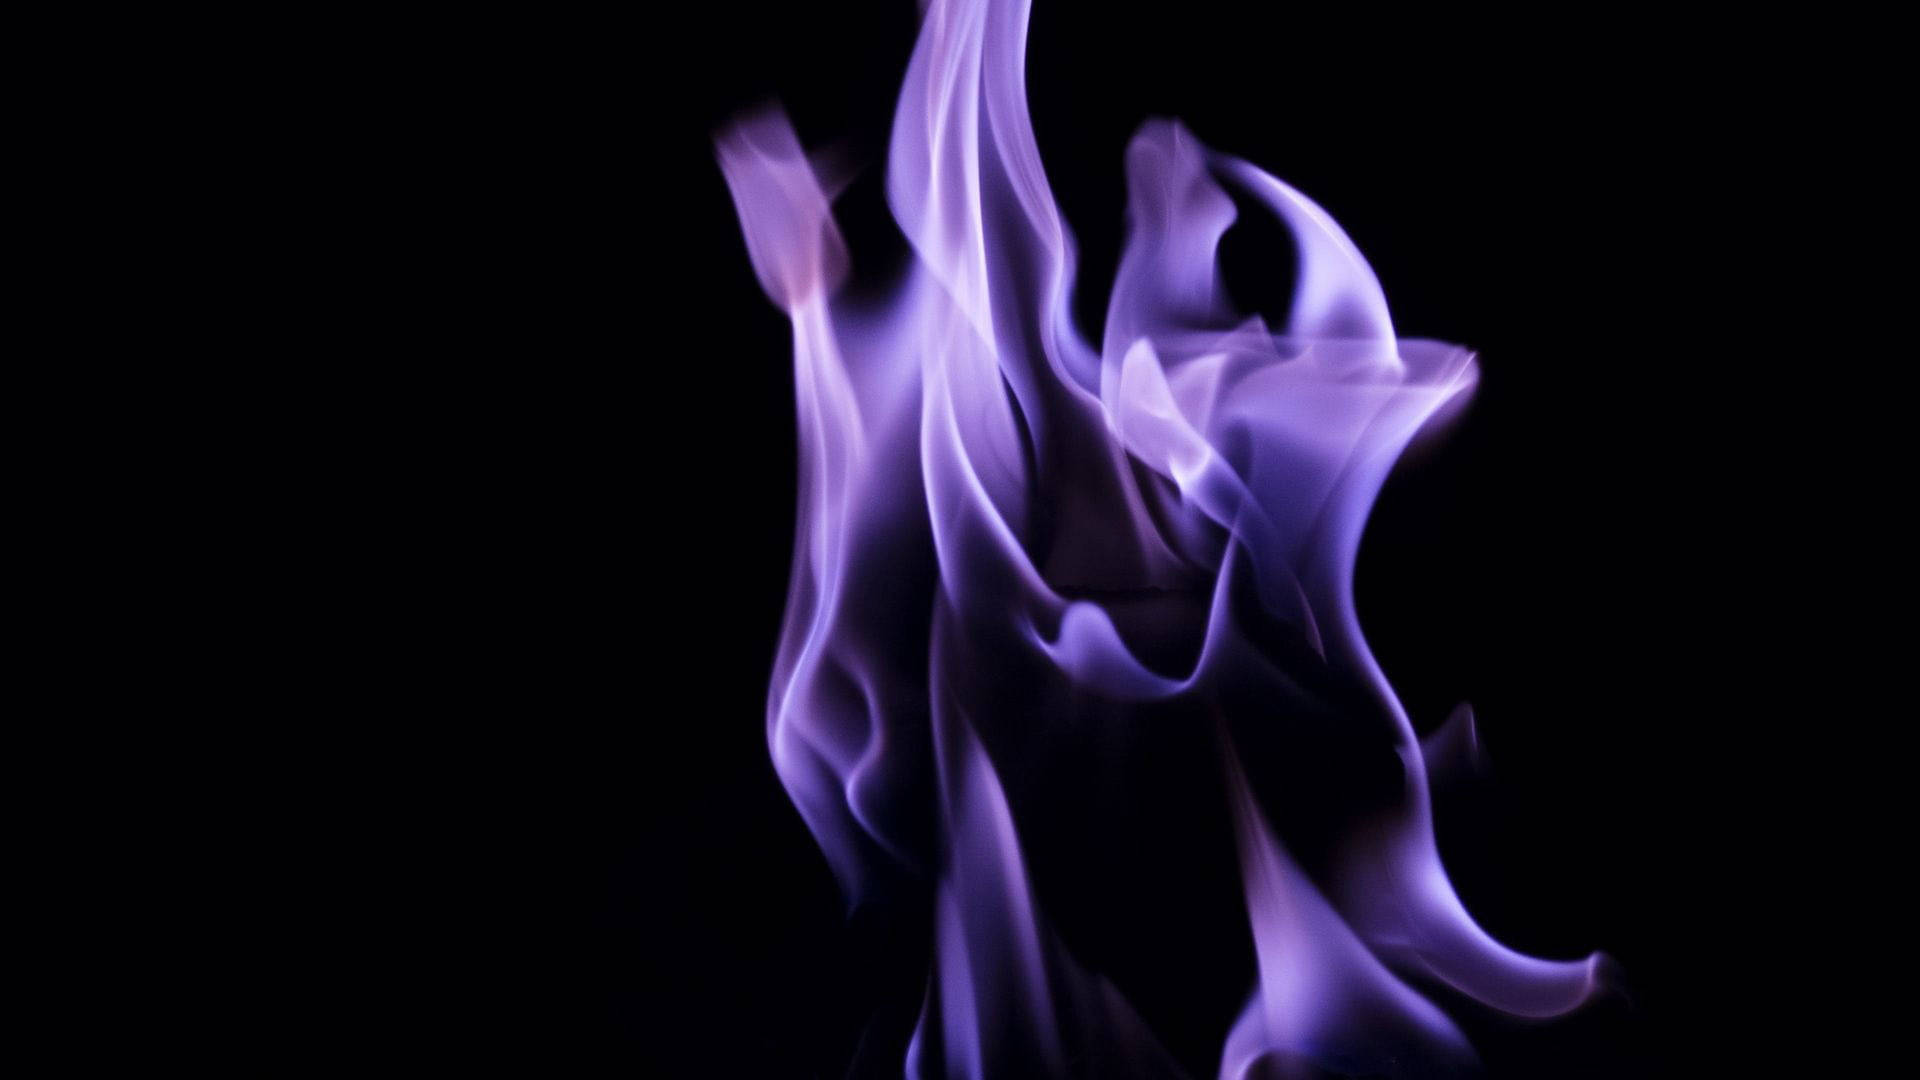 Black And Purple Aesthetic Burning Fire Wallpaper